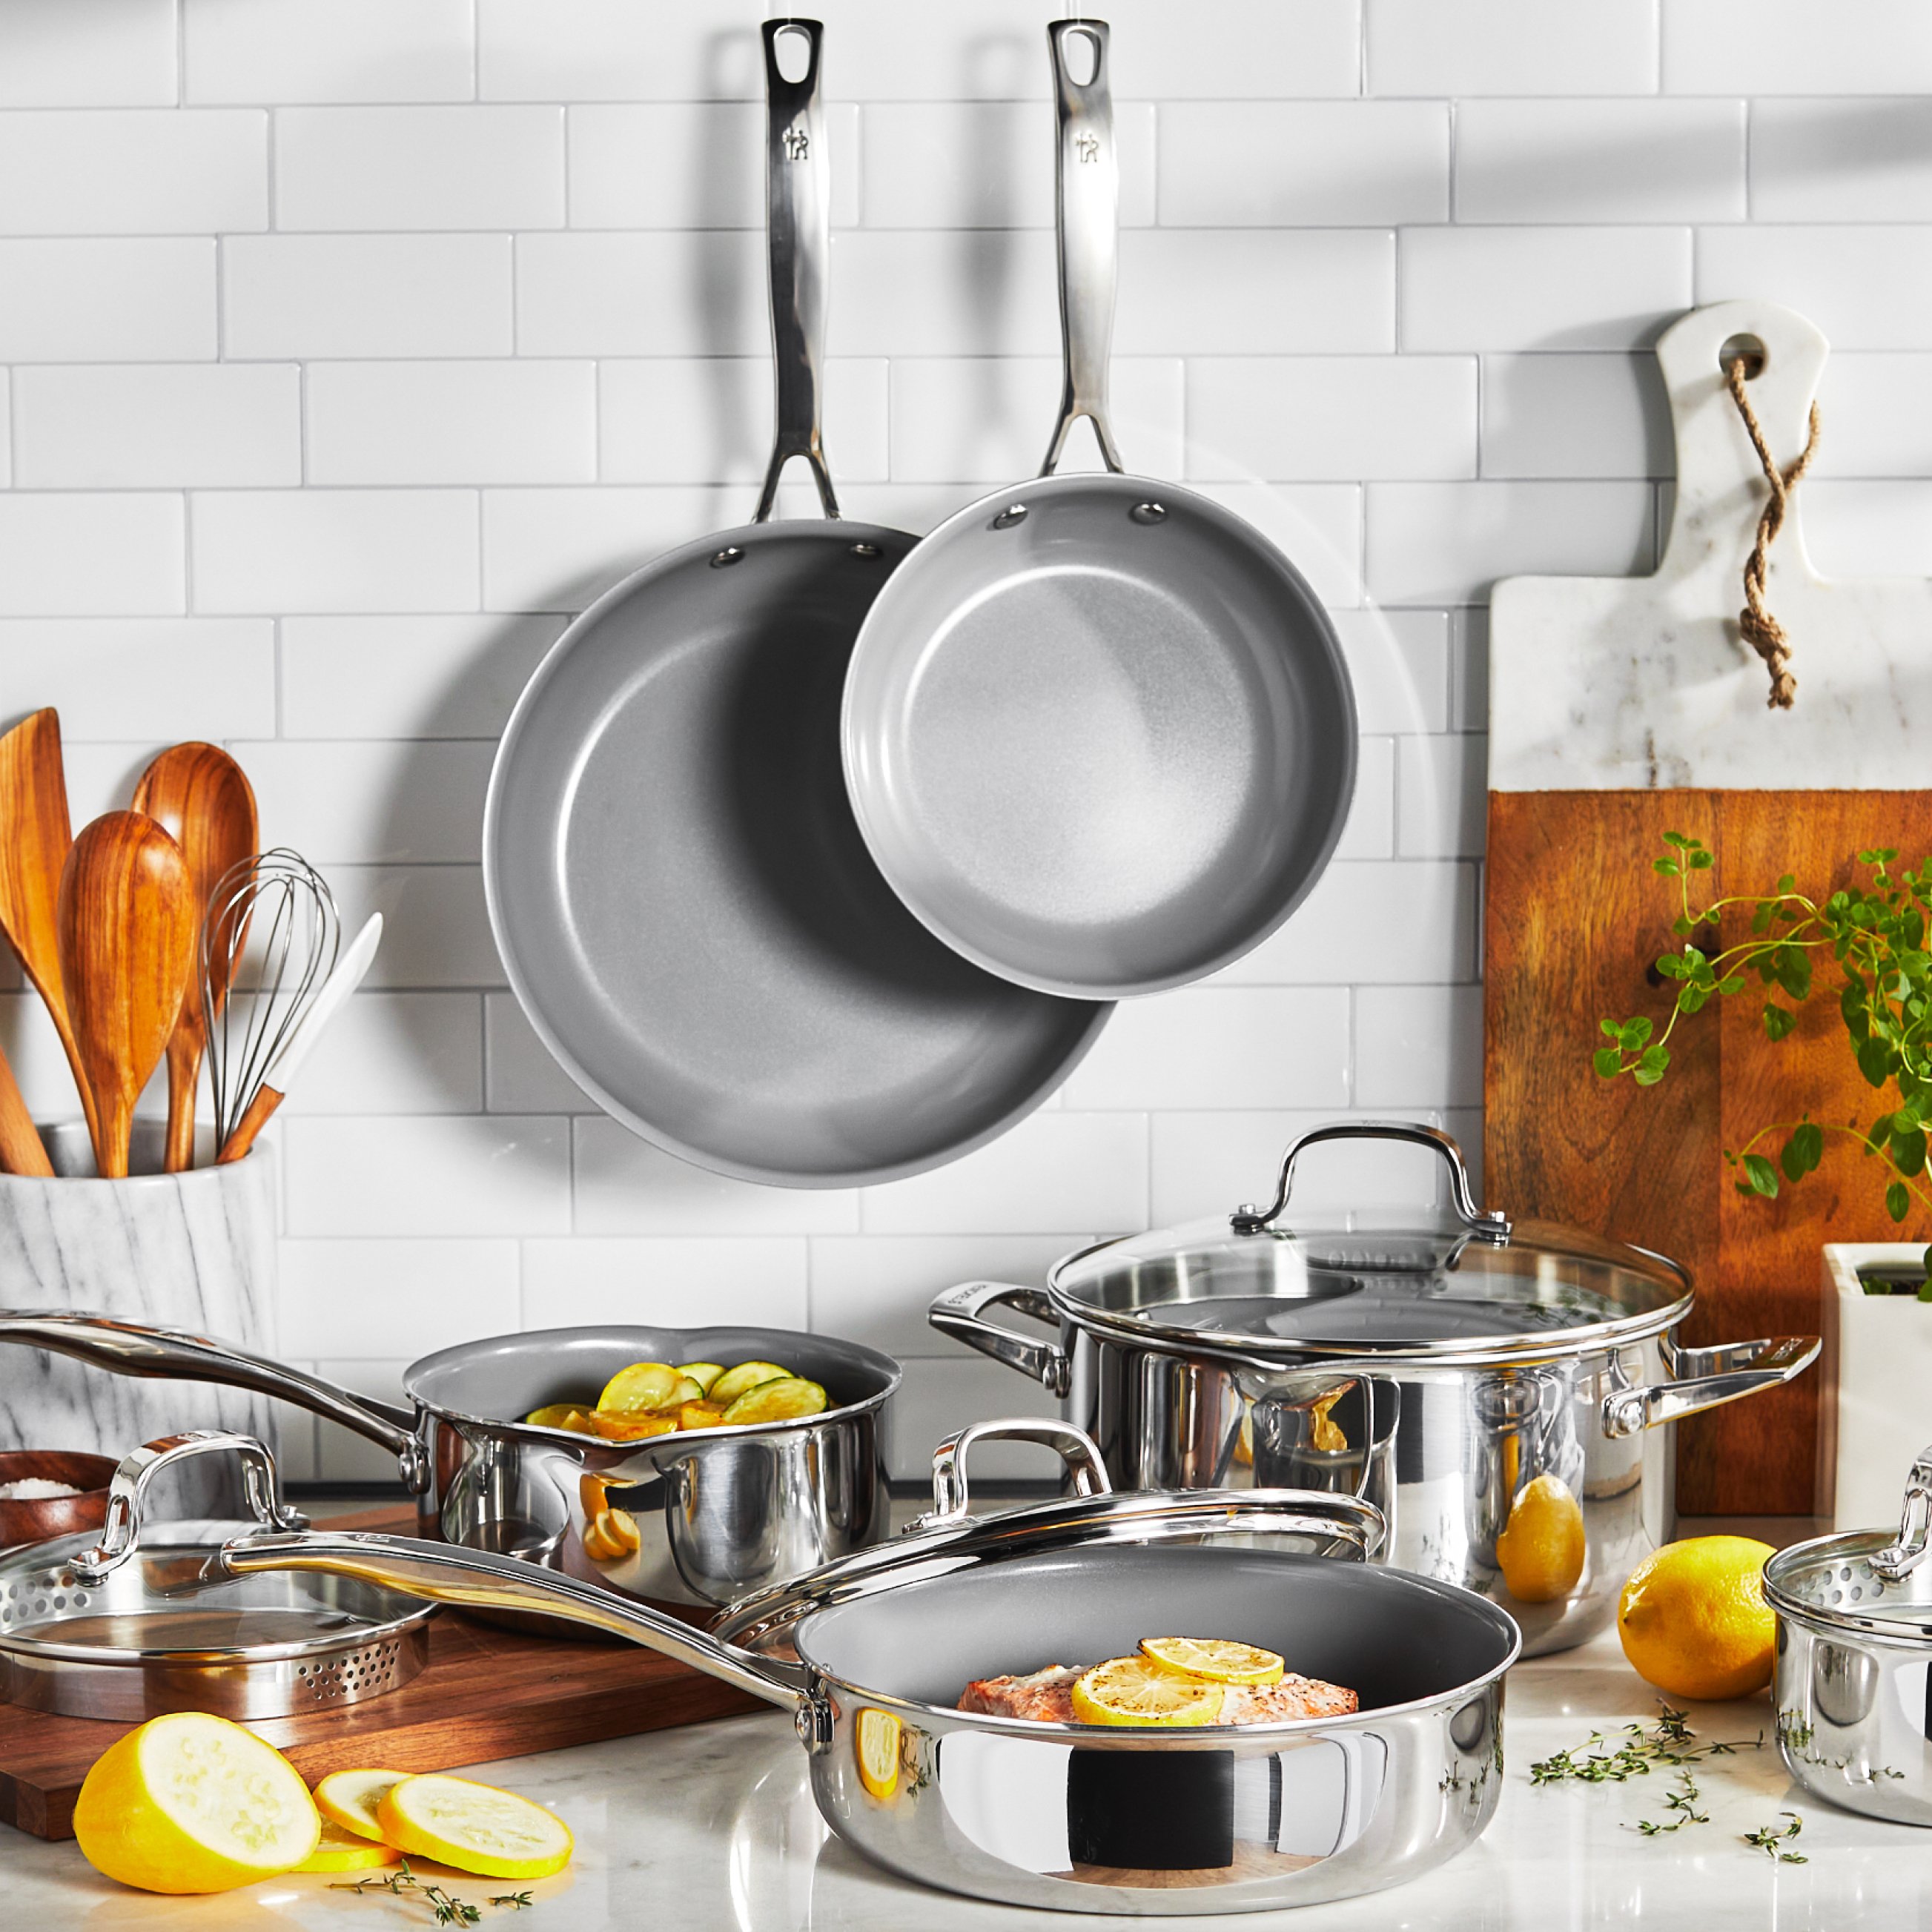 https://www.zwilling.com/on/demandware.static/-/Sites-zwilling-us-Library/default/dw10ea9b81/images/product-content/masonry-content/henckels/cookware/henckels-h3/H3COATED_06.jpg